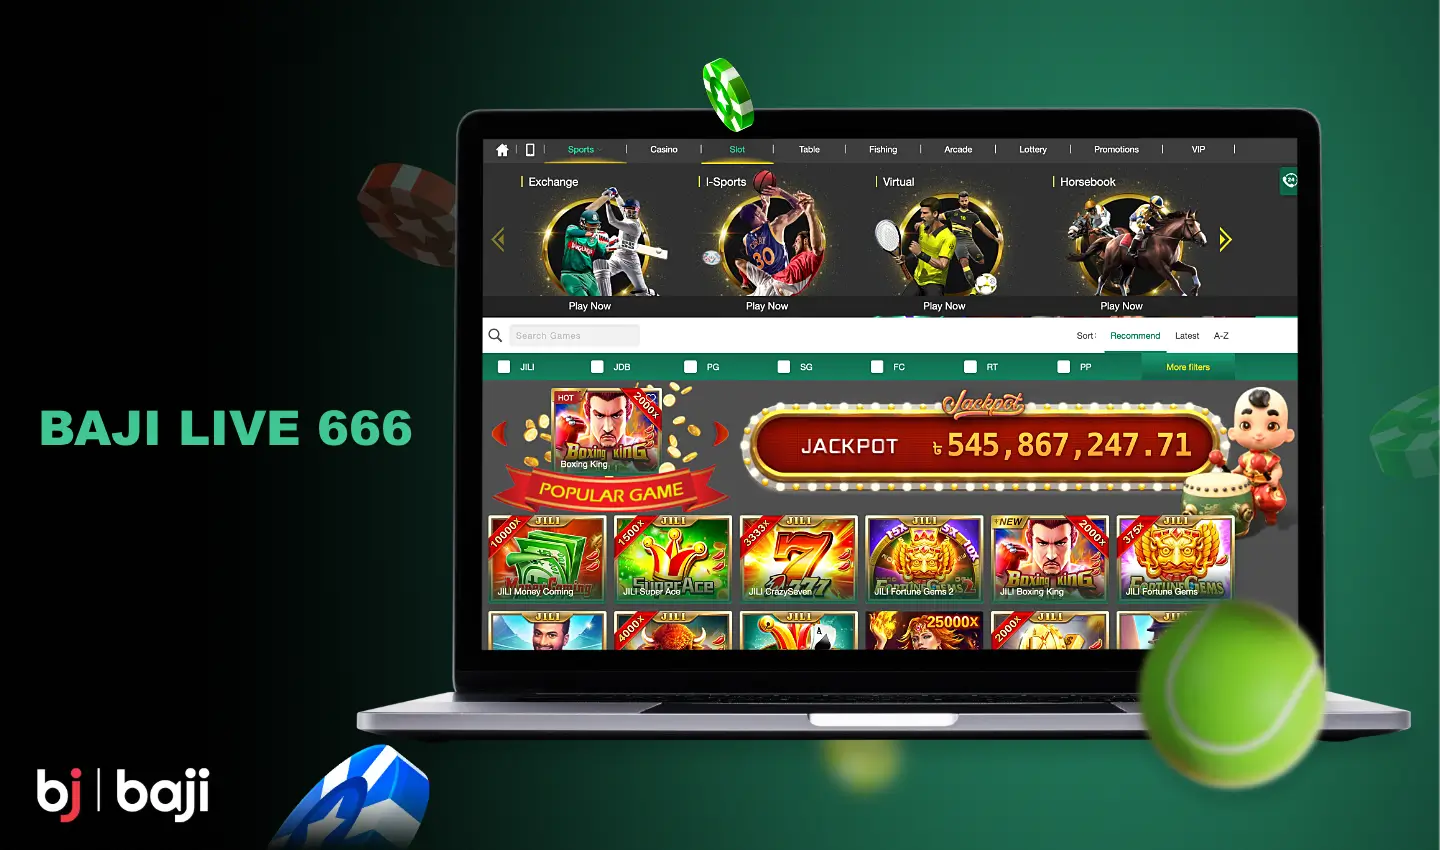 Baji Live 666 is a platform where users from Bangladesh can play casino games as well as bet on sports